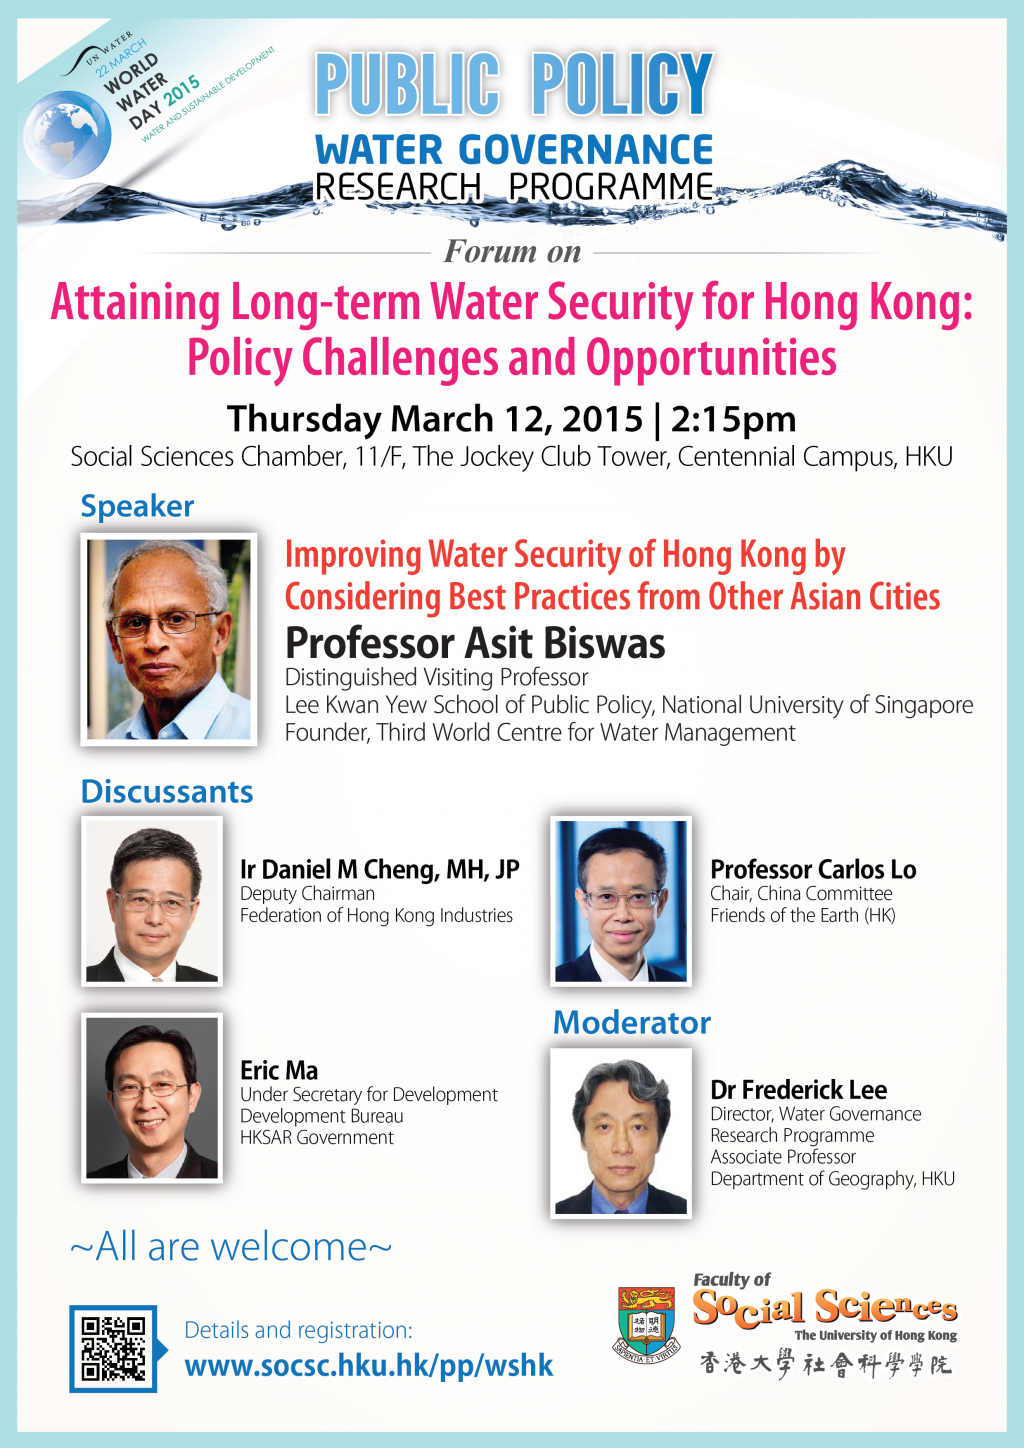 Public Policy - Forum on Attaining Long-term Water Security for Hong Kong: Policy Challenges and Opportunities